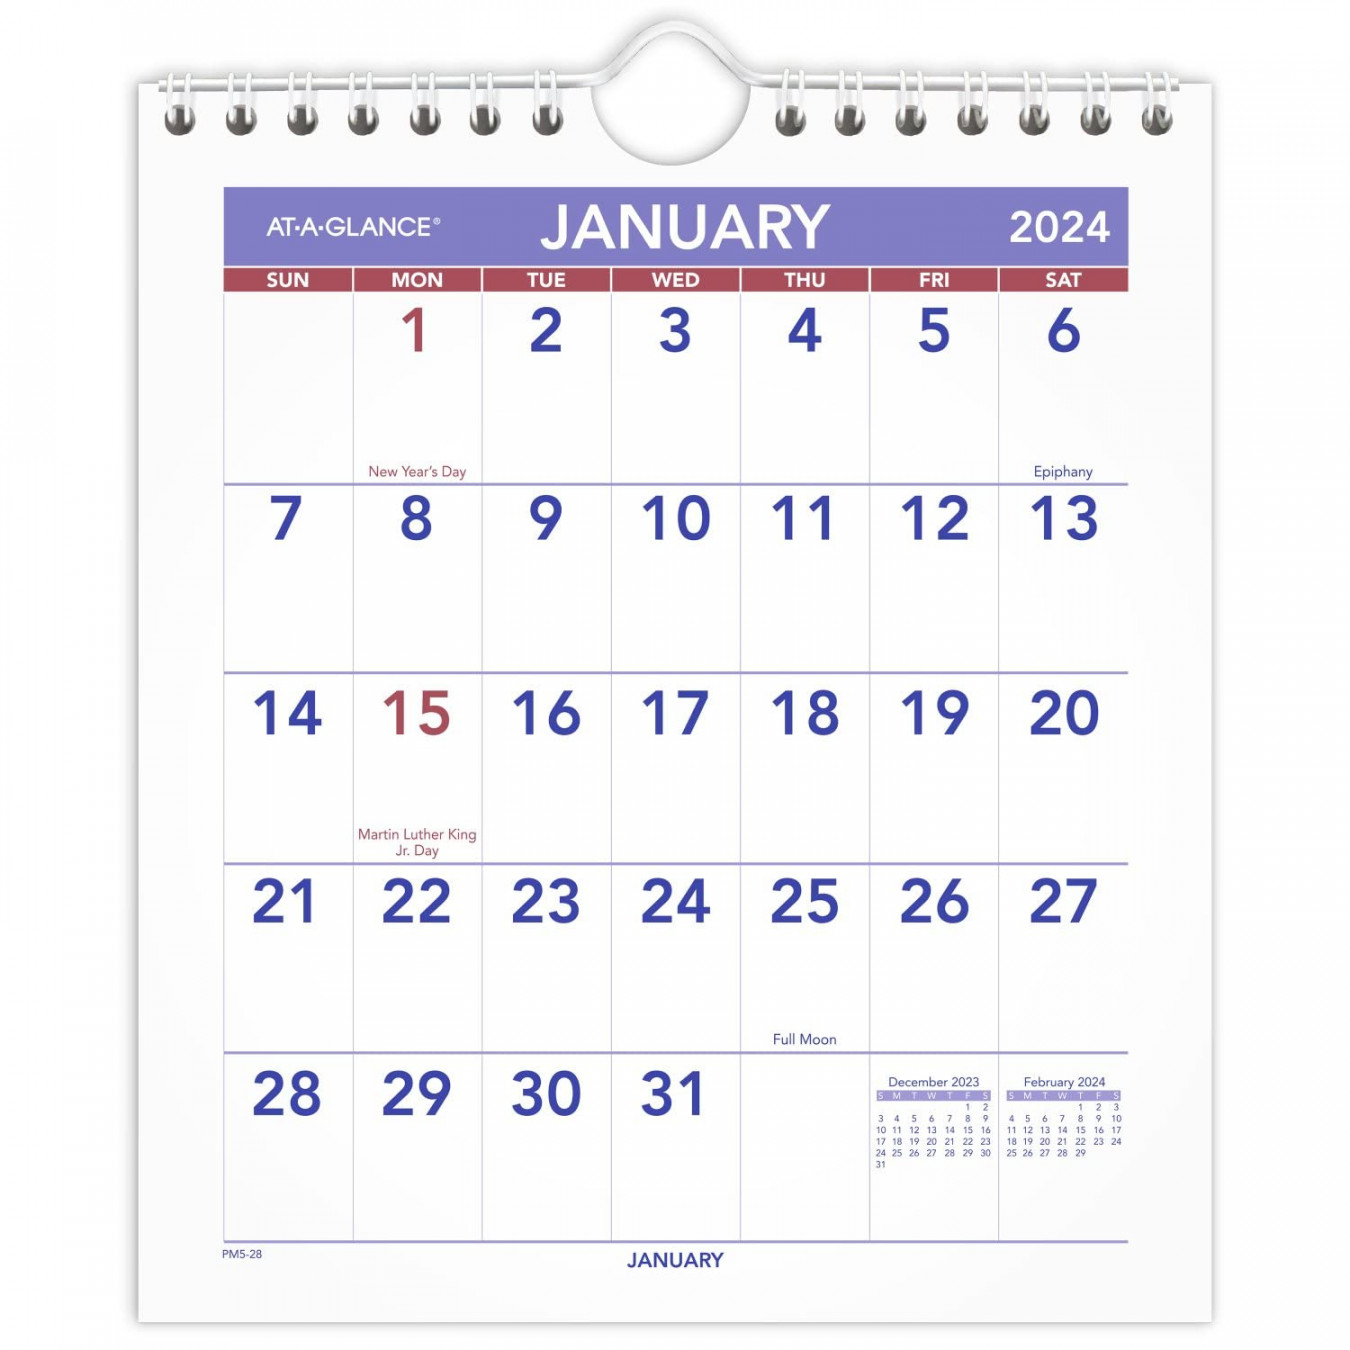 AT-A-GLANCE Wall Calendar, -/" x -/", Mini, Unruled Blocks, Spiral Bound, Monthly (PM584)